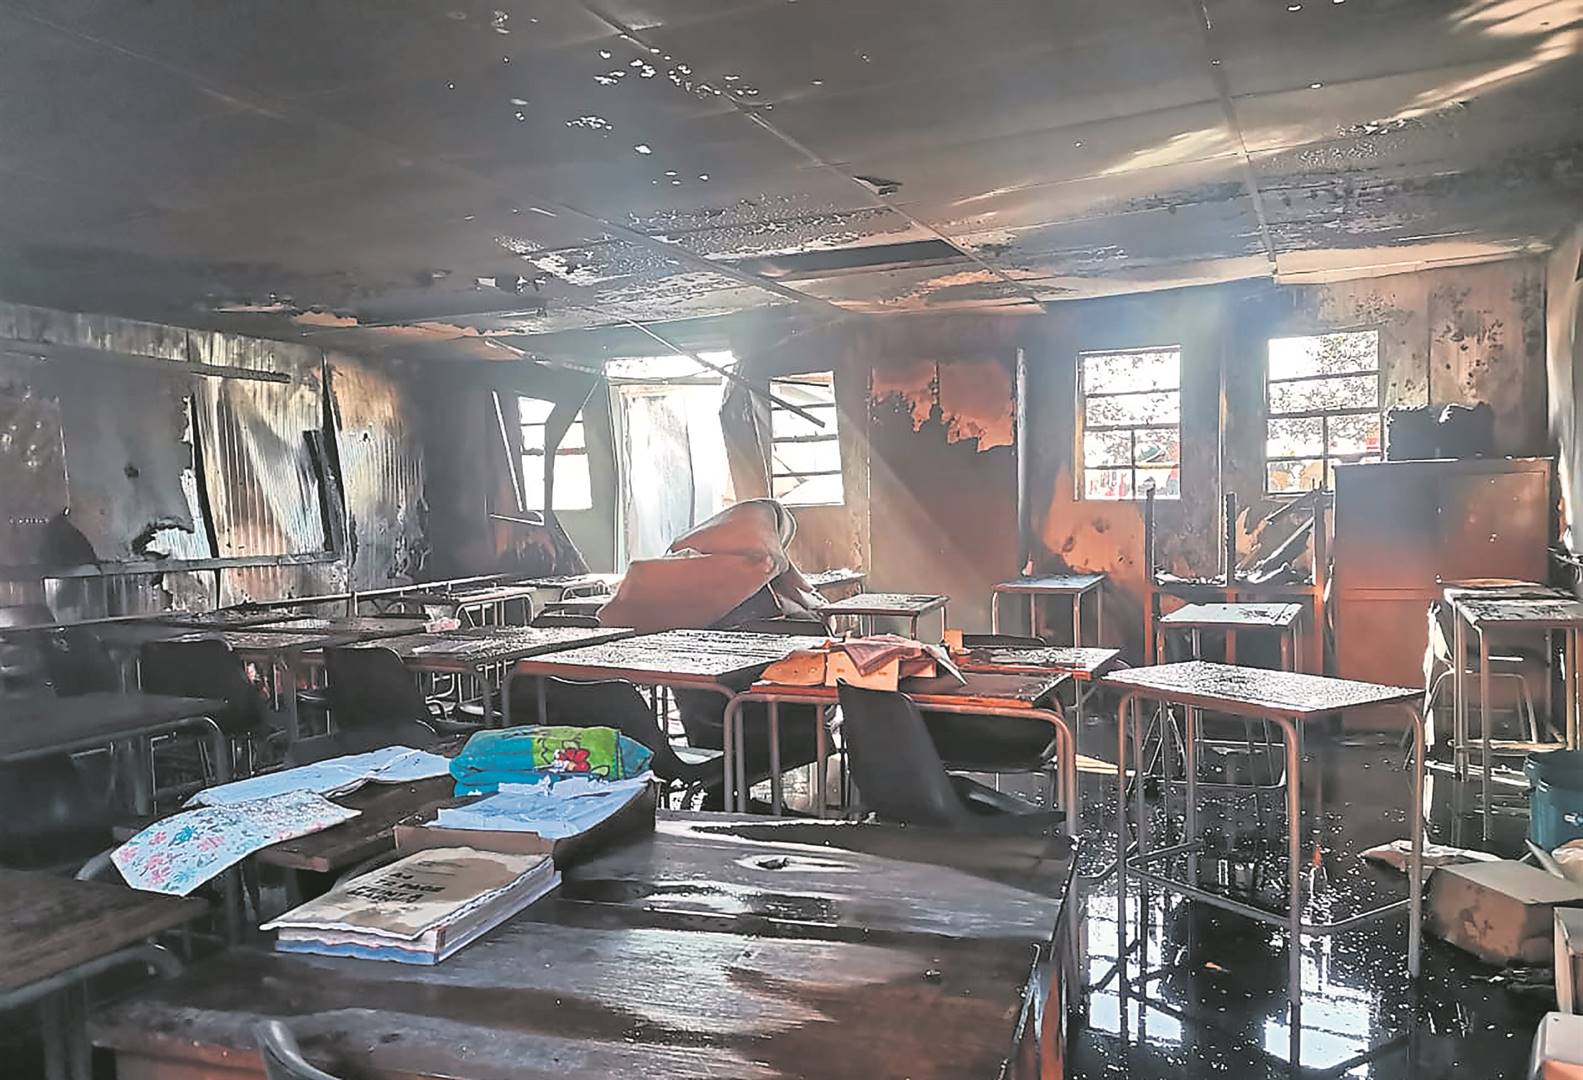 One of the classrooms damaged by the blaze at Eden Park Secondary School in Ekurhuleni over the weekend. 